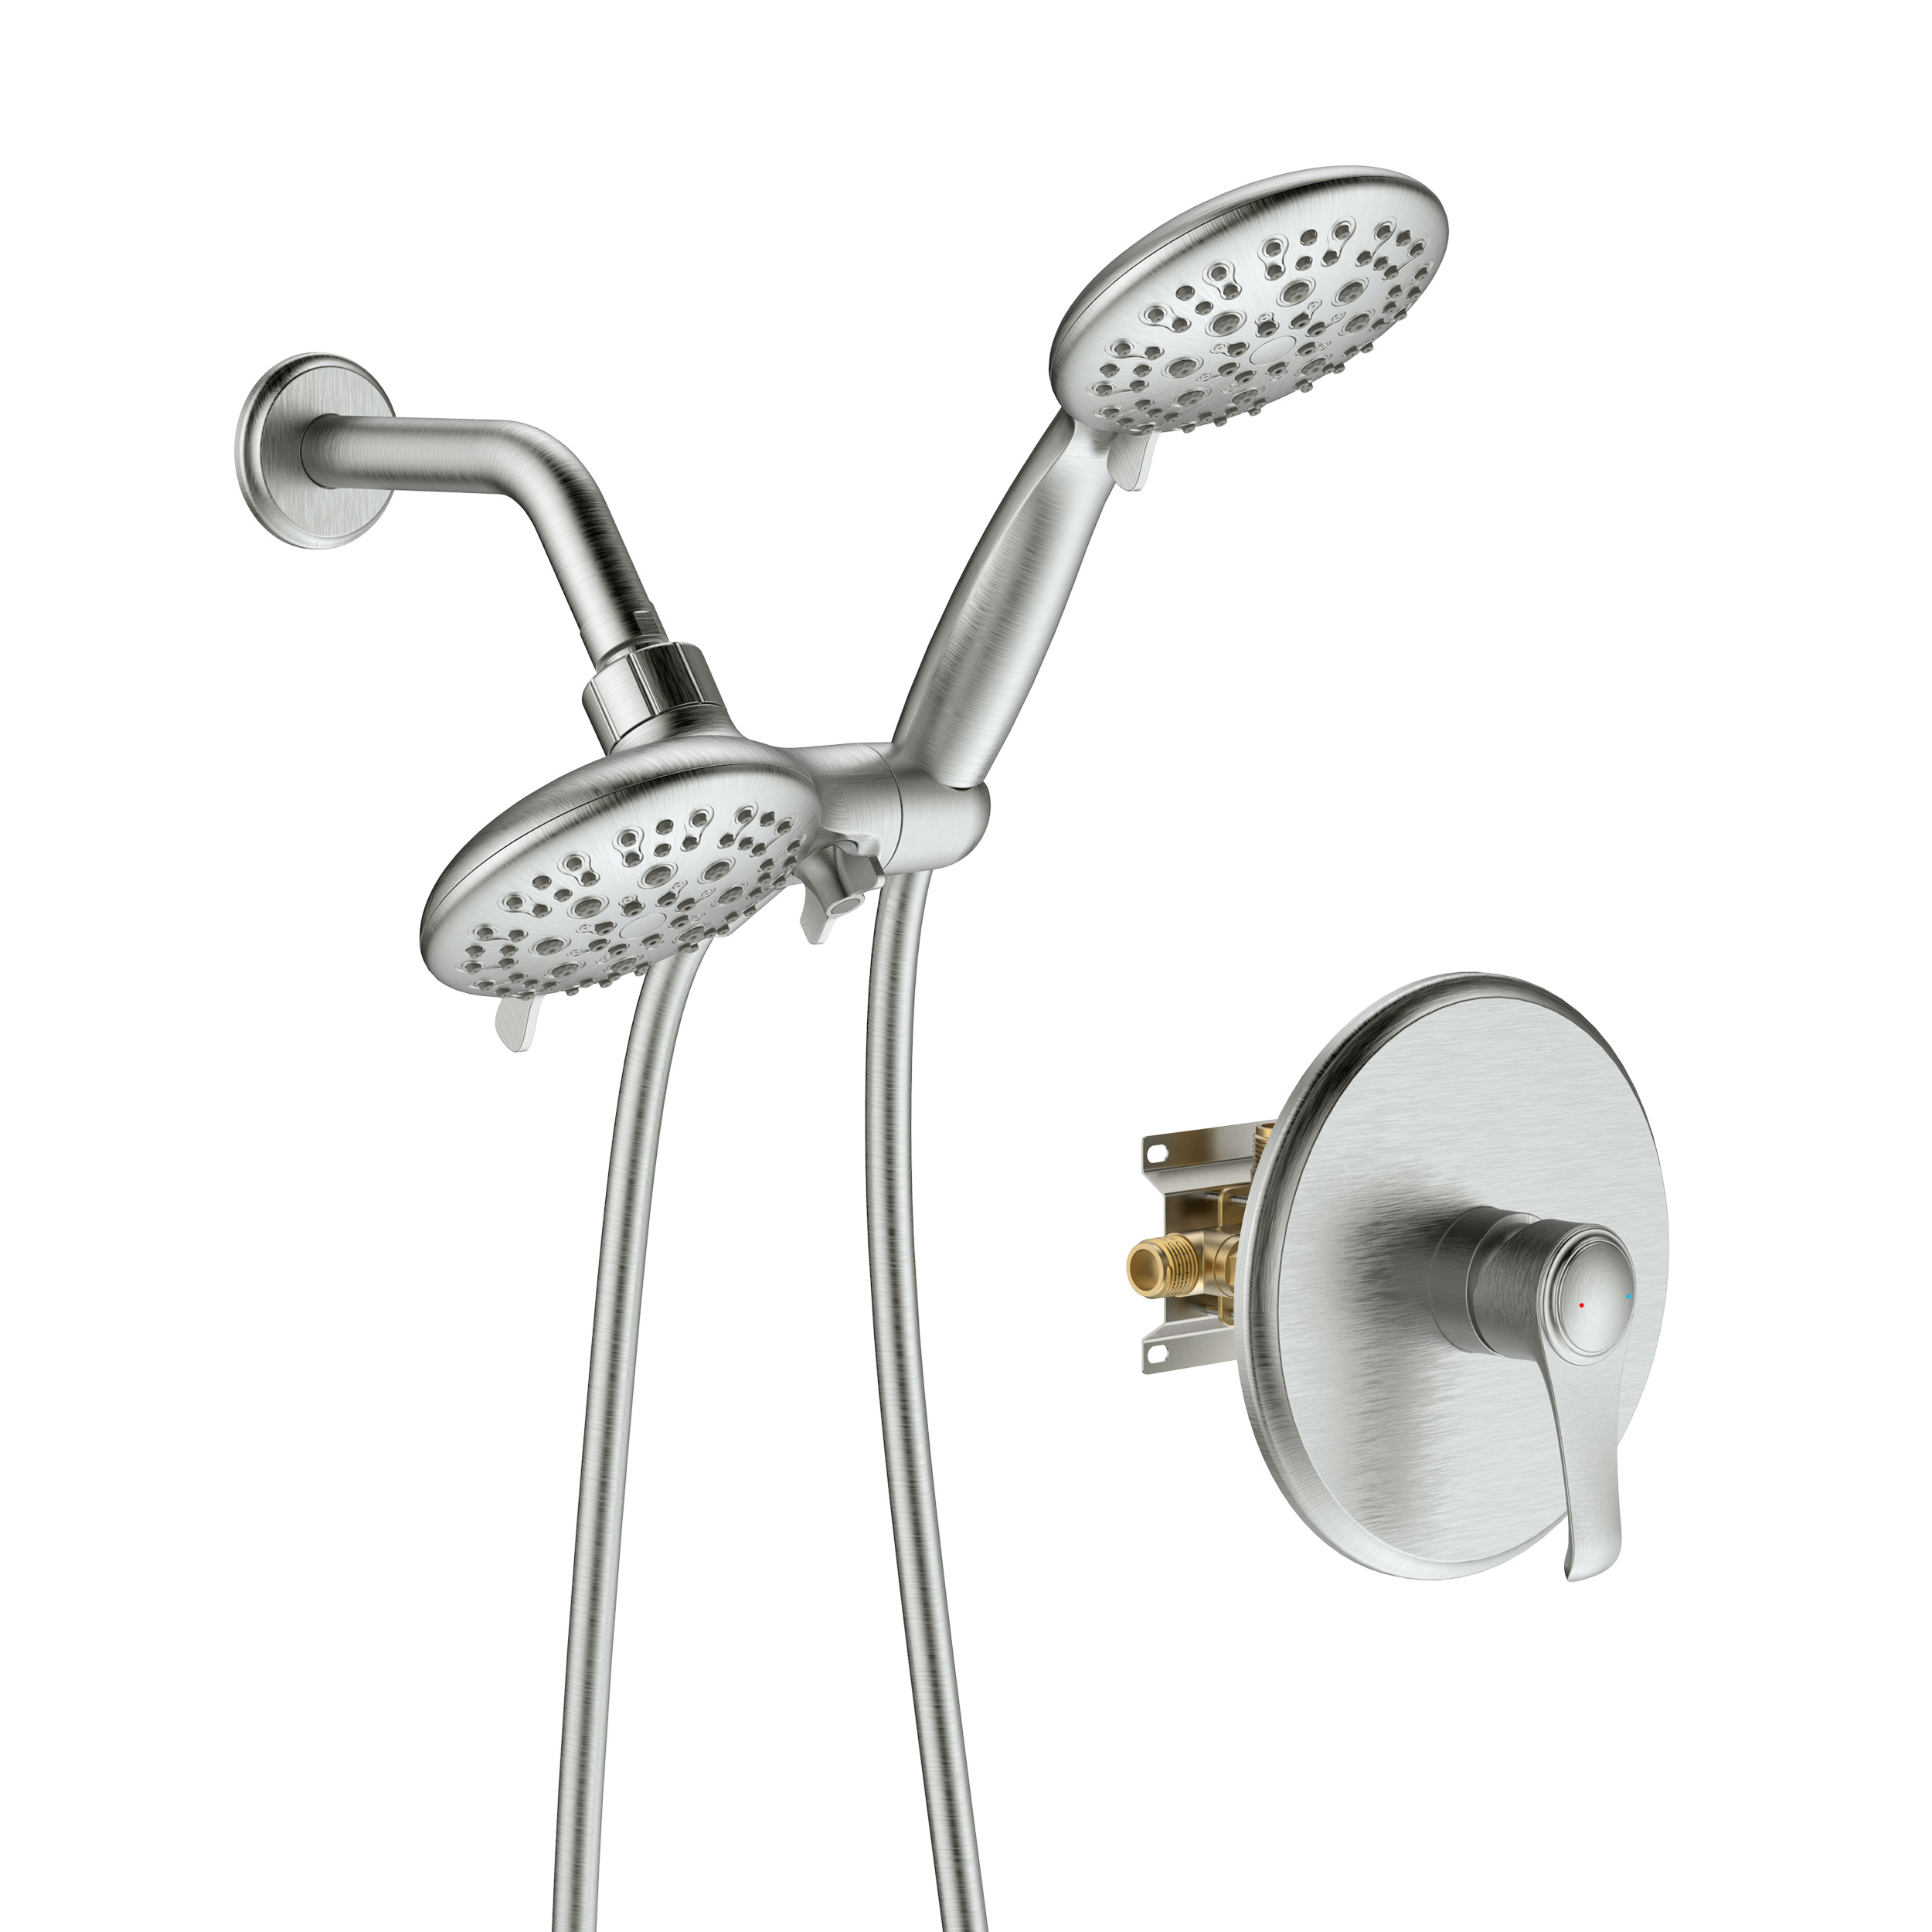 Large Amount of water Multi Function Dual Shower Head - Shower System with 4." Rain Showerhead, 6-Function Hand Shower, Brushed Nickel